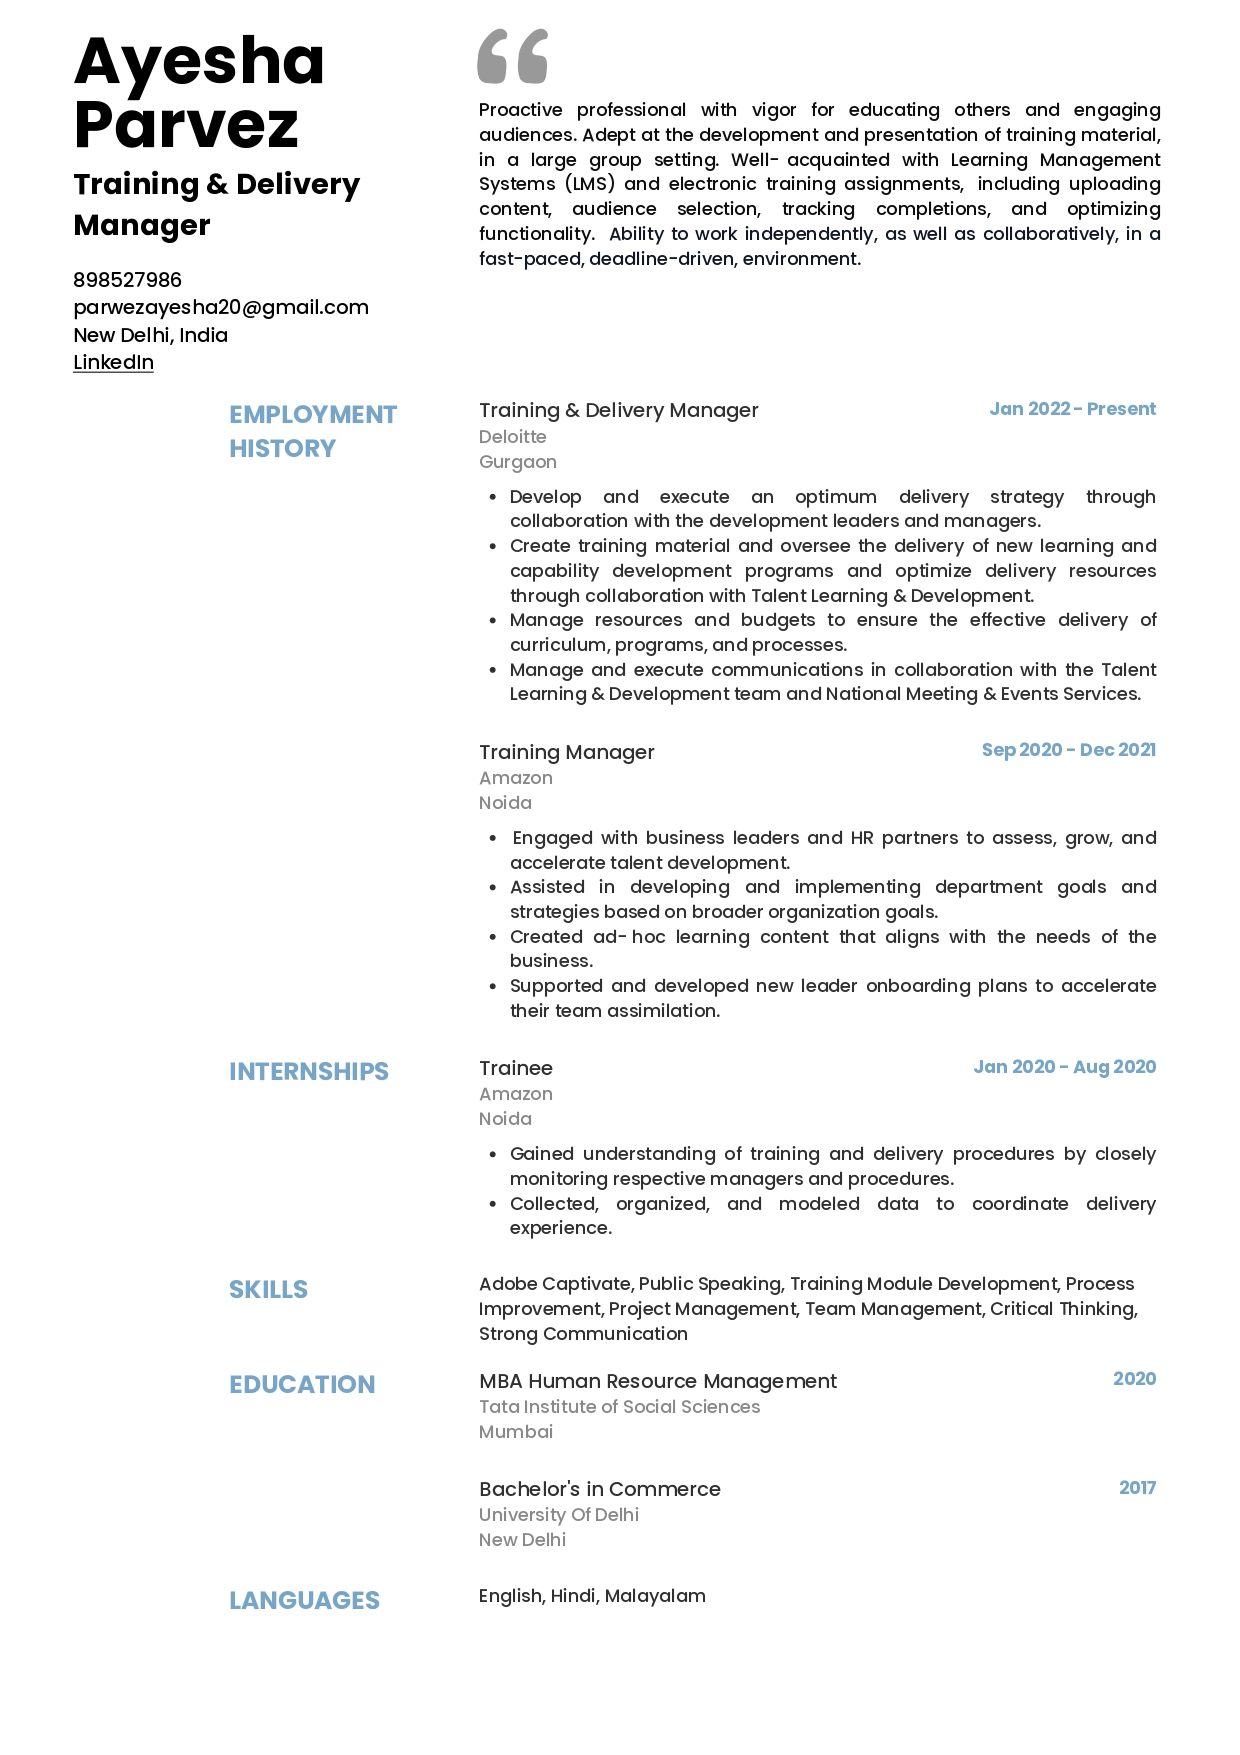 Sample Resume of Training & Delivery Manager | Free Resume Templates & Samples on Resumod.co